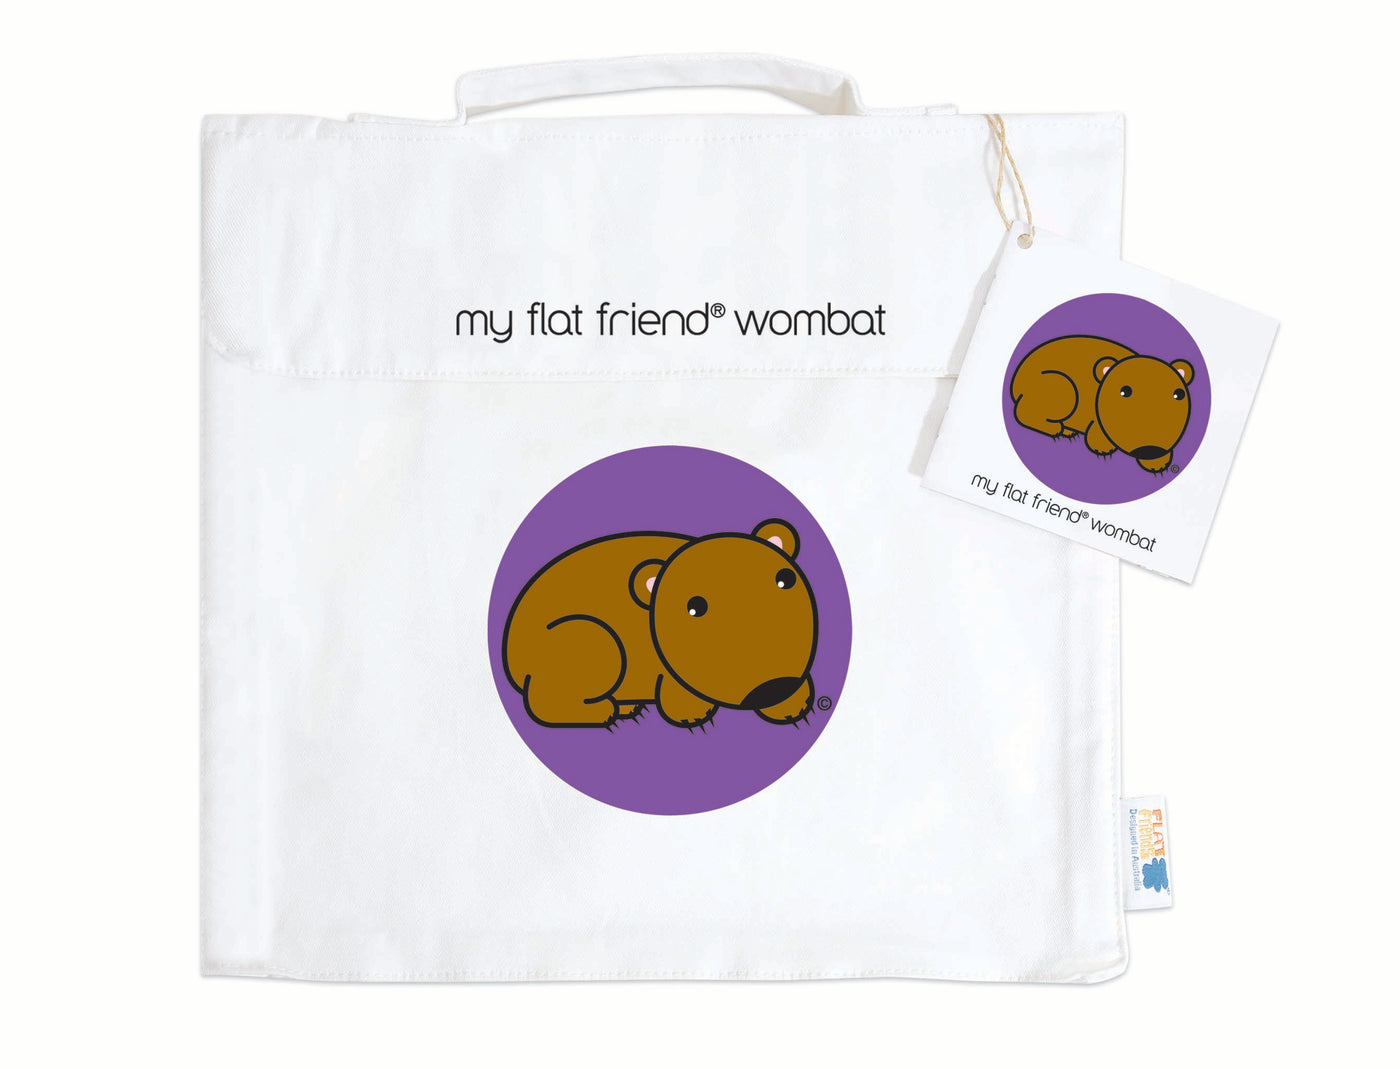 Diary of a Wombat Book & Wombat Lambskin soft toy (natural plush) & Free Carry Bag